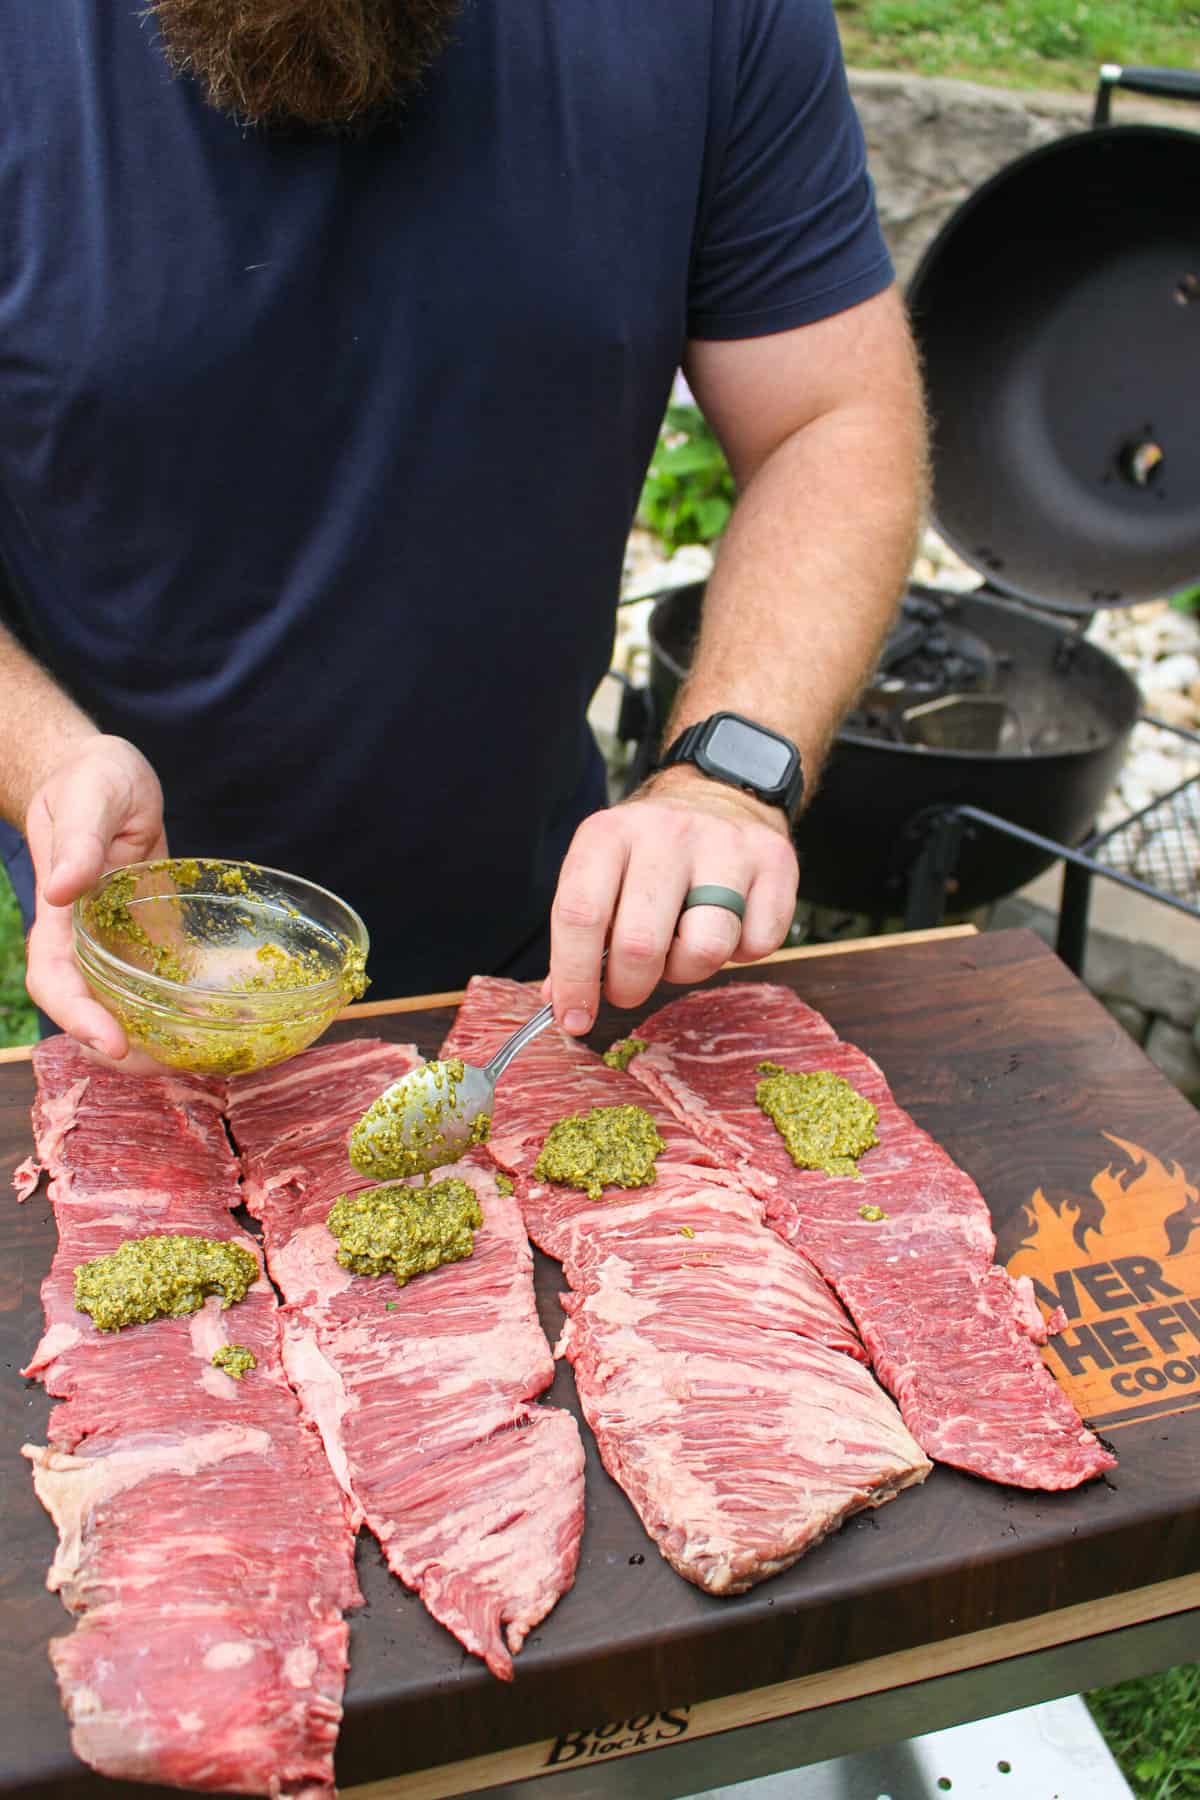 skirt steak being topped with spoonfuls of pesto